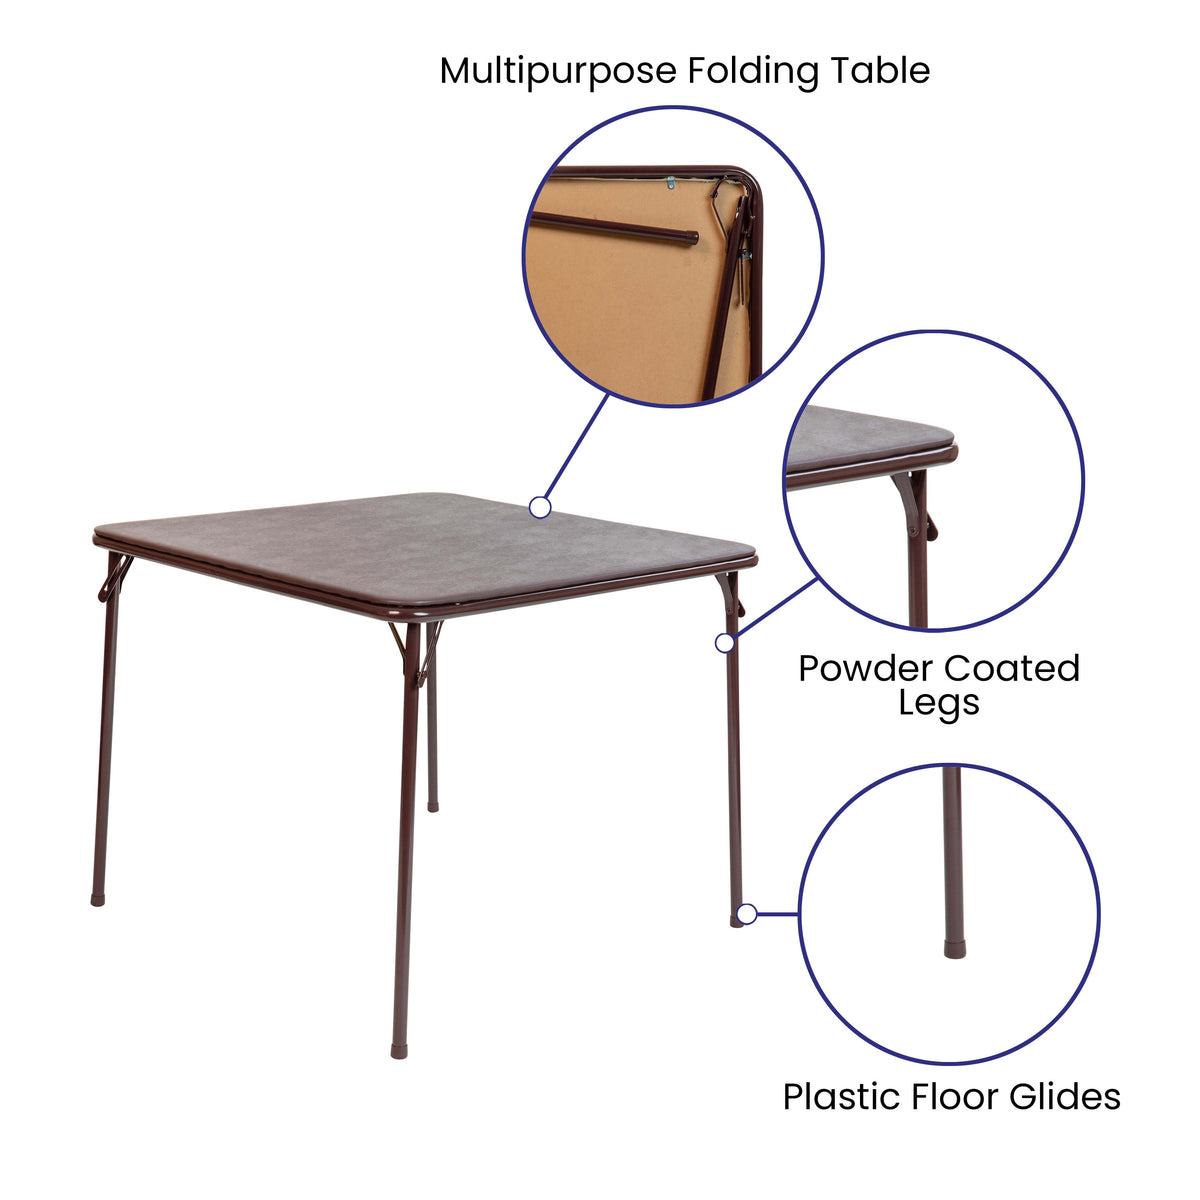 Brown |#| Brown Foldable Card Table with Vinyl Table Top - Game Table - Portable Table